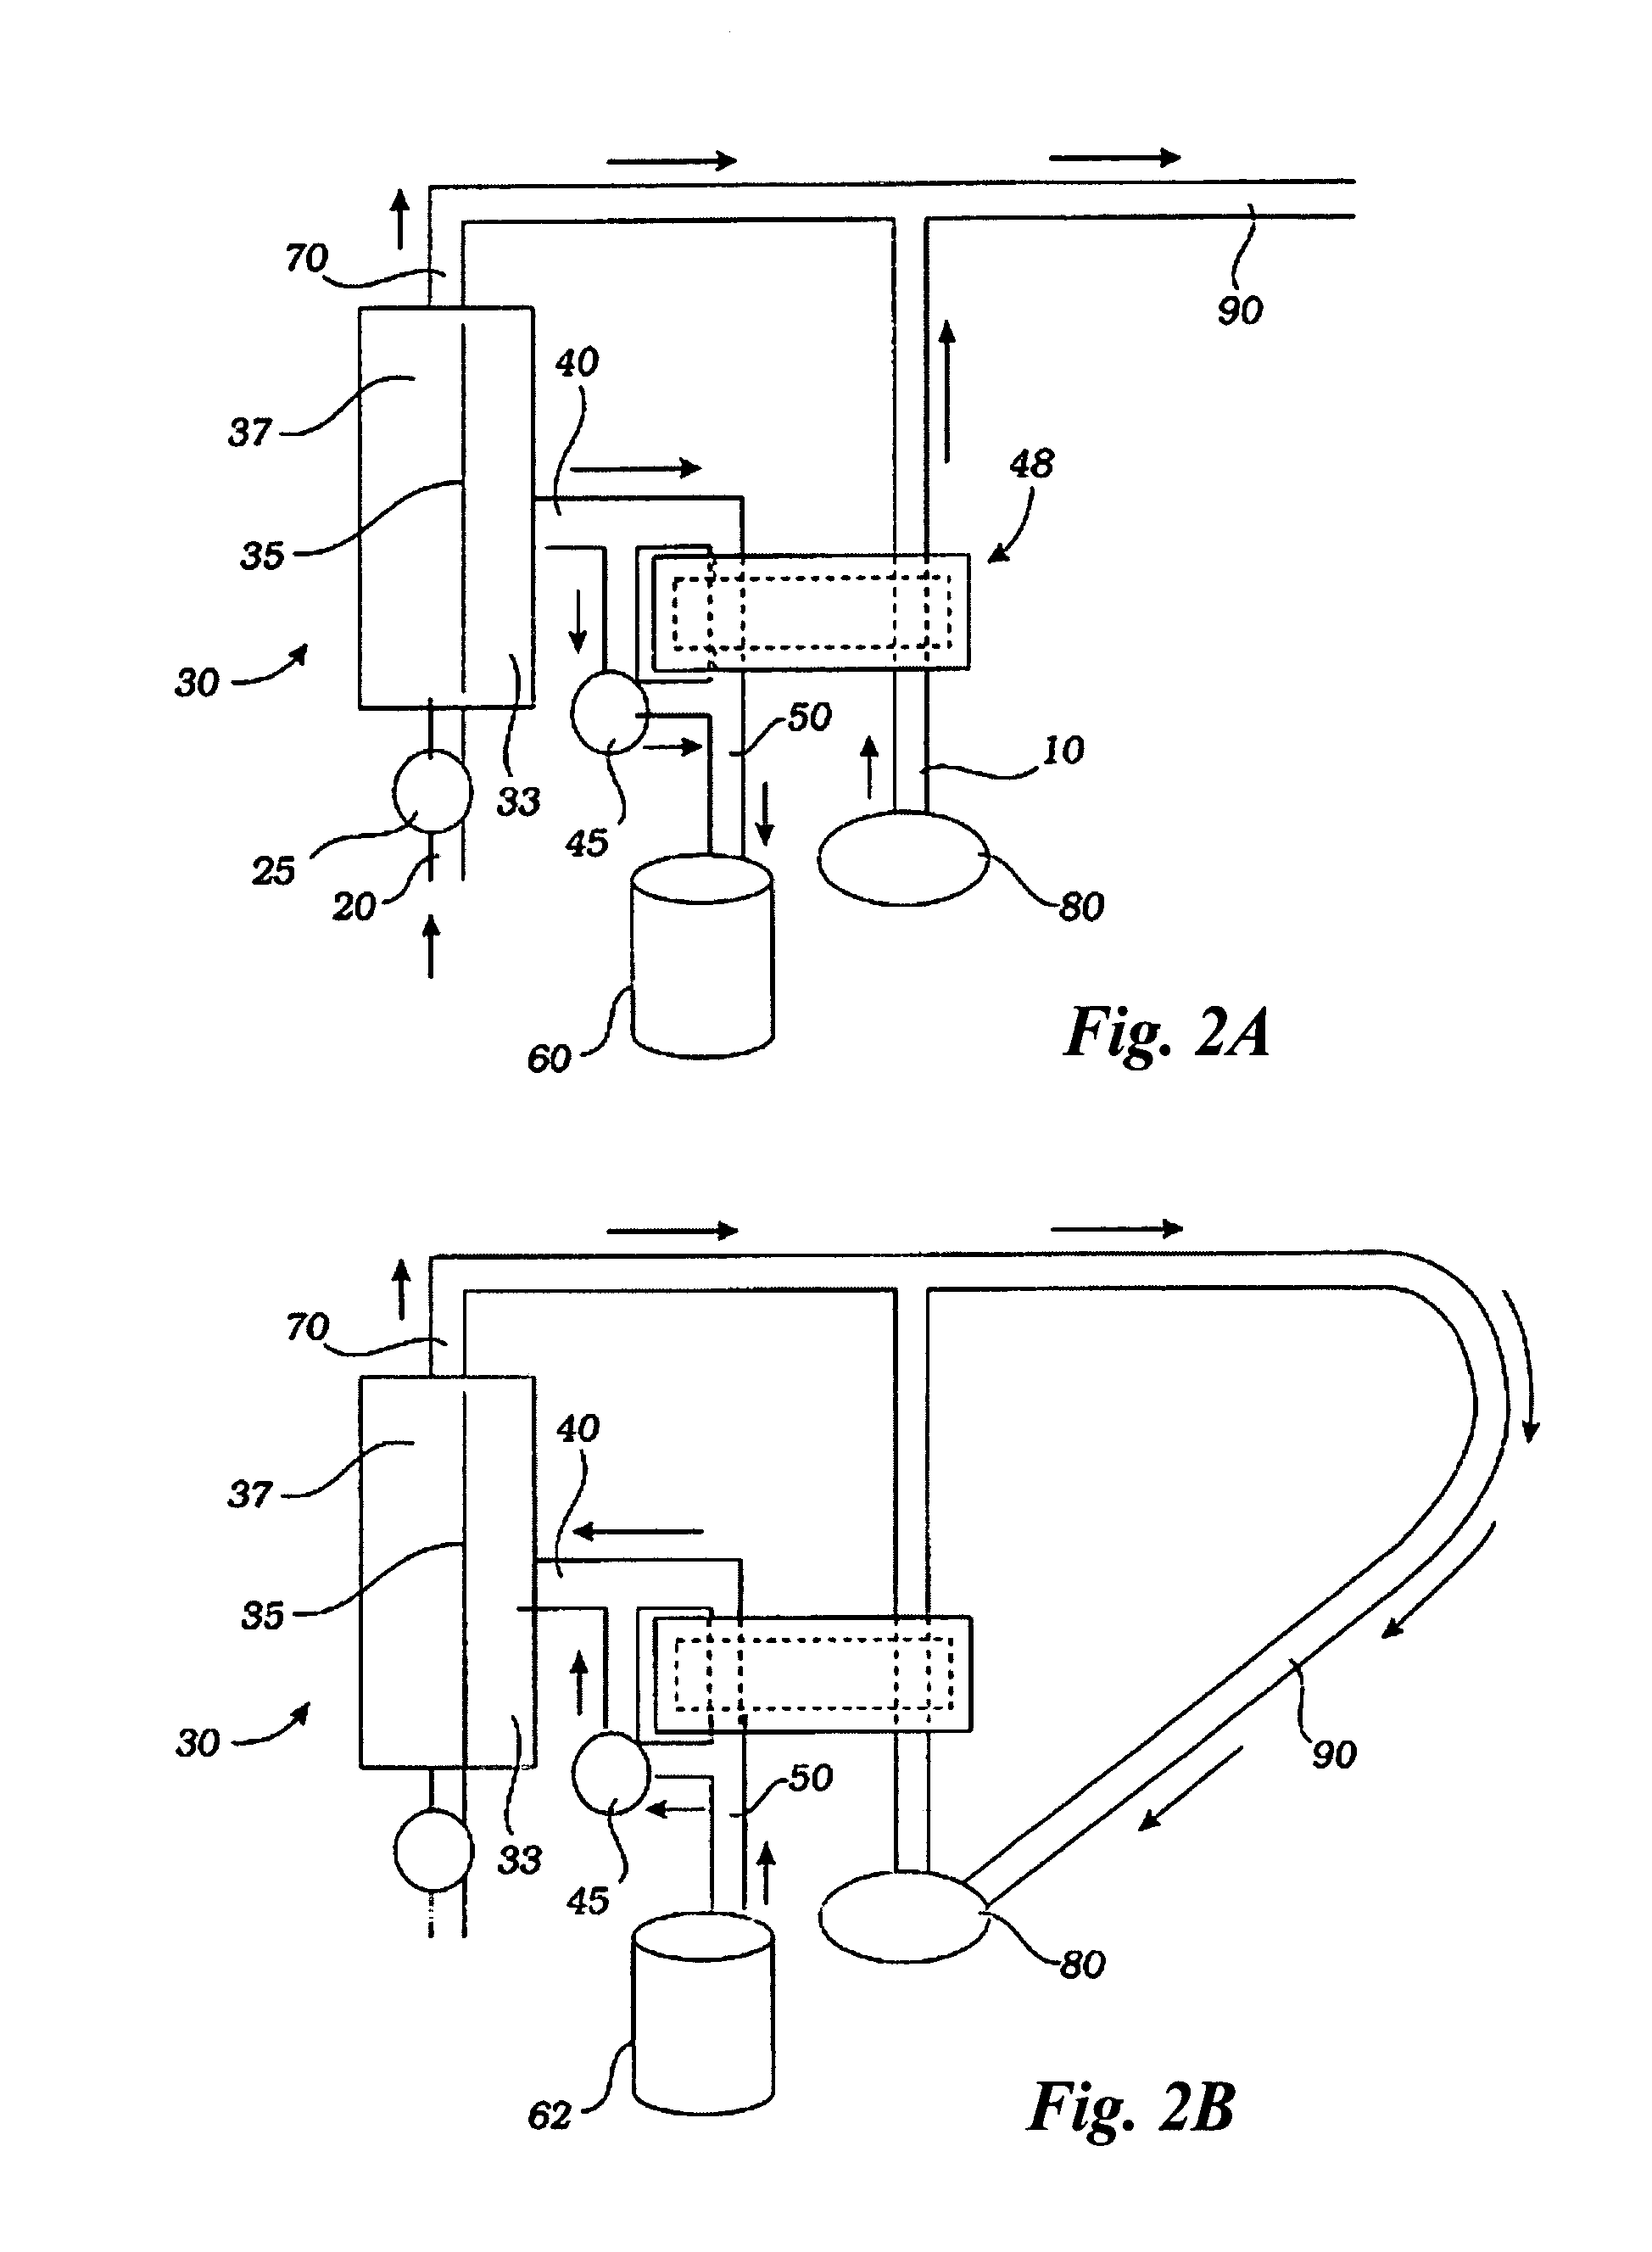 Fluid circuits, systems, and processes for extracorporeal blood processing